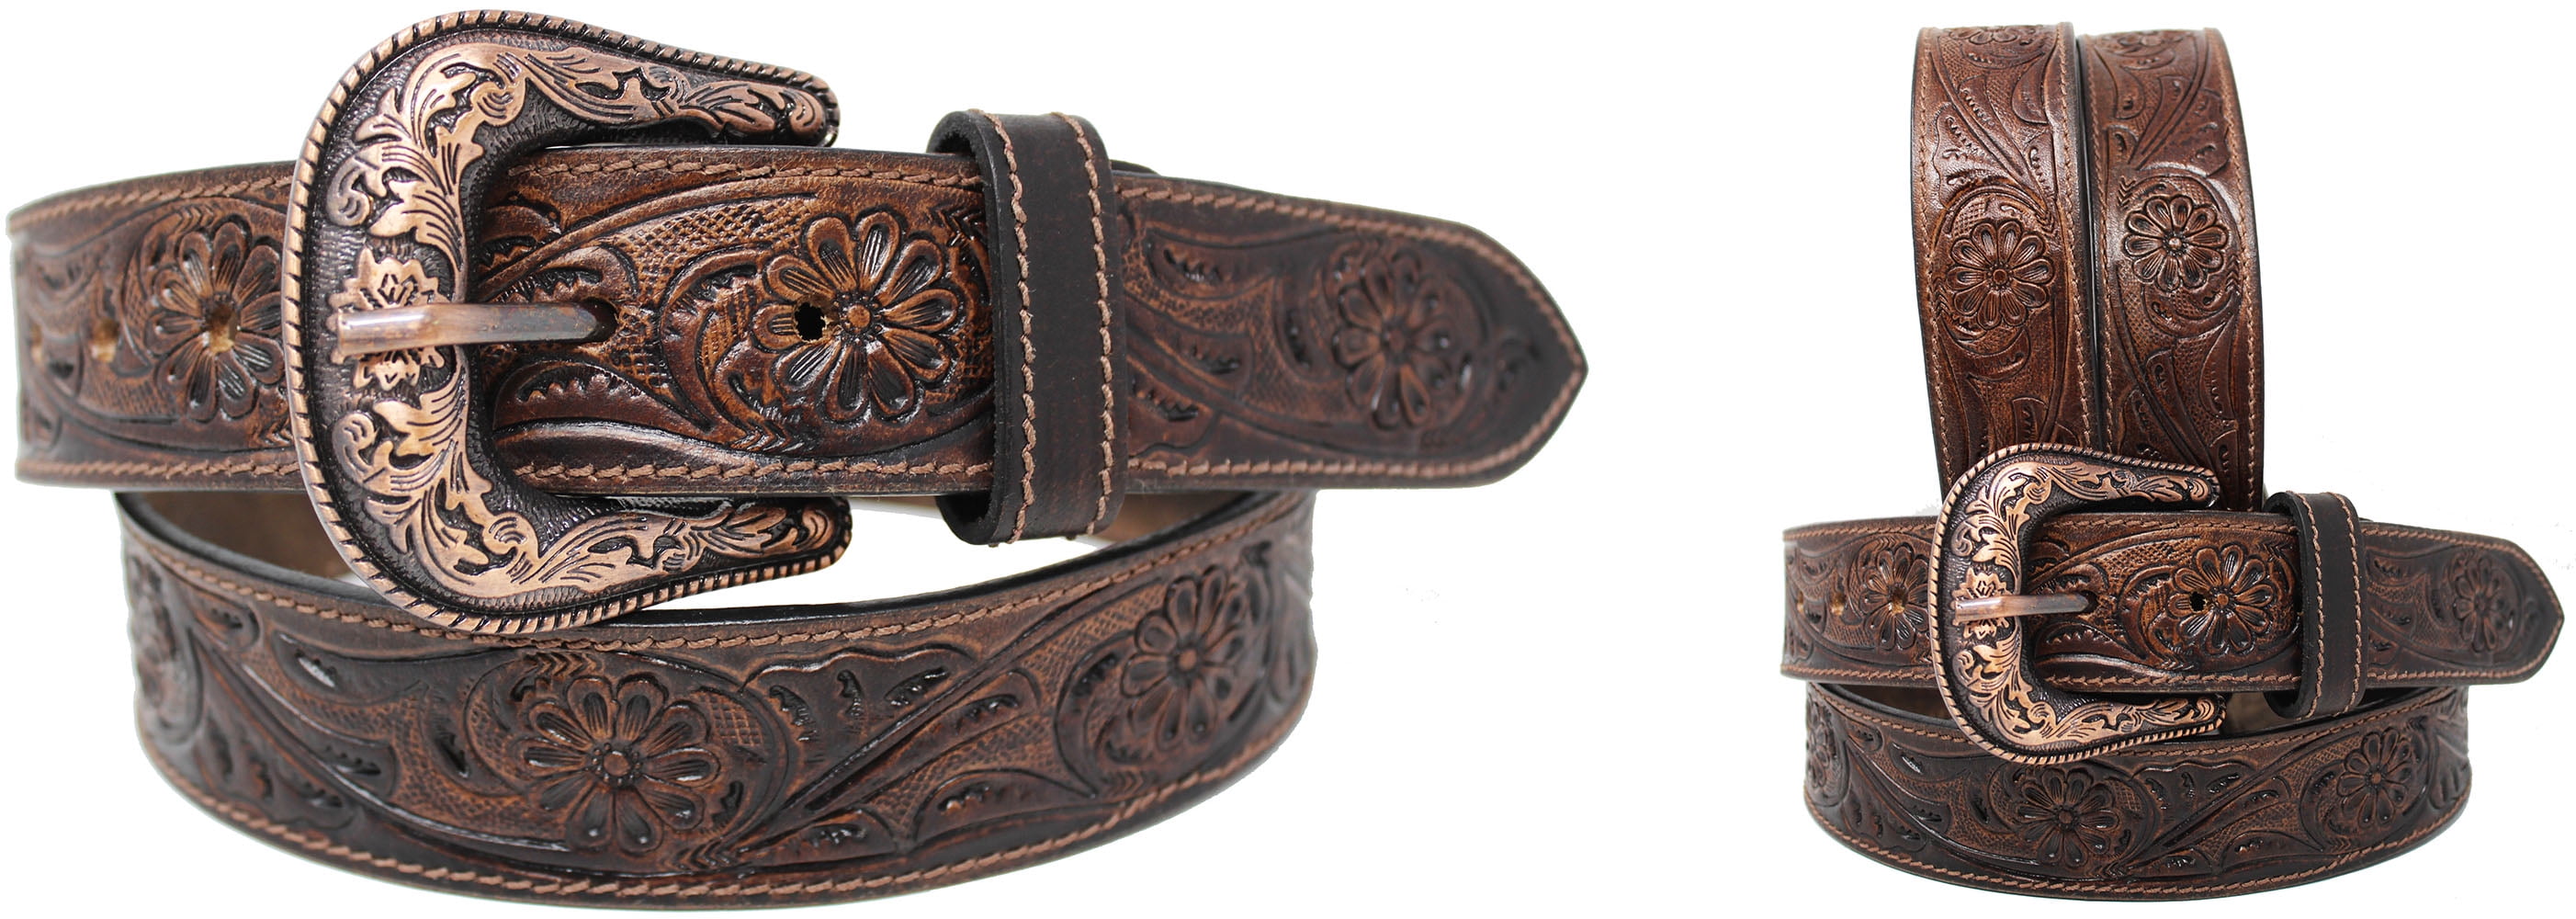 37-38 Men's 1-1/2 Wide Brown Leather Floral Tooled Casual Jean Belt  26AA104BR 